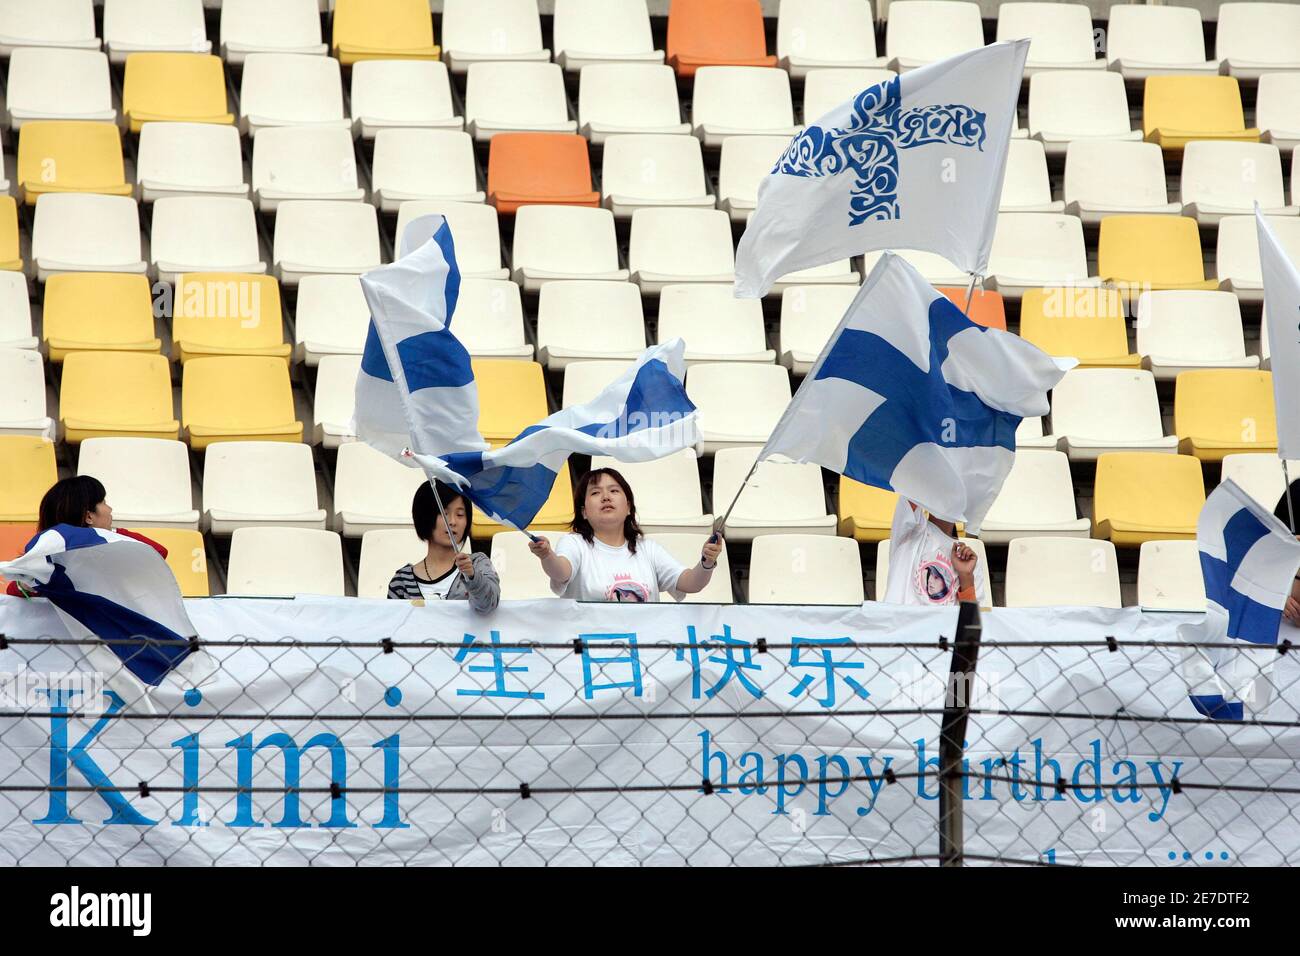 Fans of Ferrari Formula One driver Kimi Raikkonen of Finland hold banners and flags as they congratulate him on his birthday during the second practice session for Sunday's Chinese F1 Grand Prix at the Shanghai Circuit October 17, 2008.   REUTERS/Aly Song (CHINA) Stock Photo